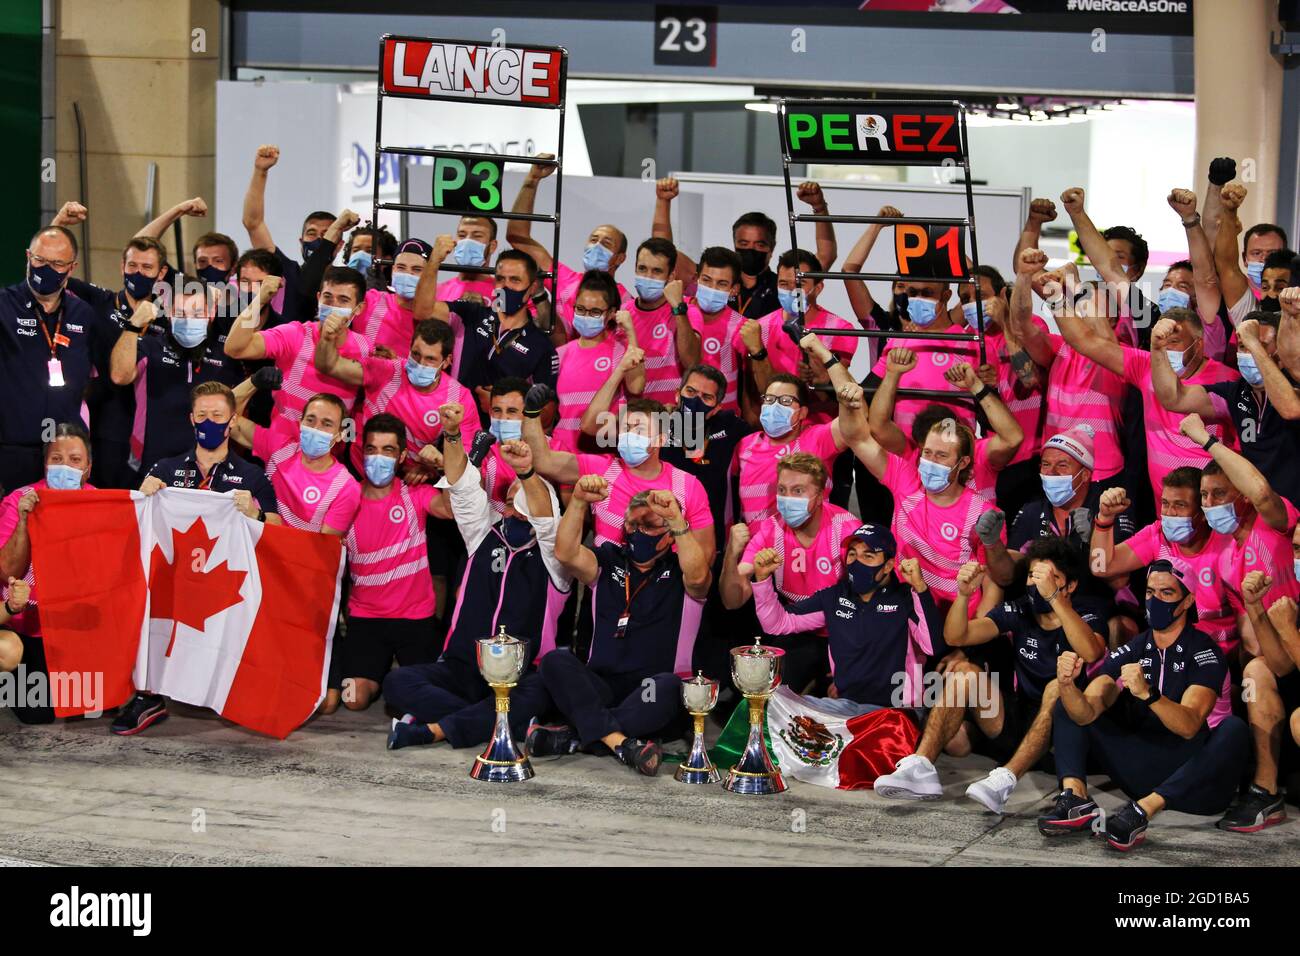 Racing Point F1 Team celebrates victory for Sergio Perez (MEX) Racing Point F1 Team and third place for Lance Stroll (CDN) Racing Point F1 Team. Sakhir Grand Prix, Sunday 6th December 2020. Sakhir, Bahrain. Stock Photo